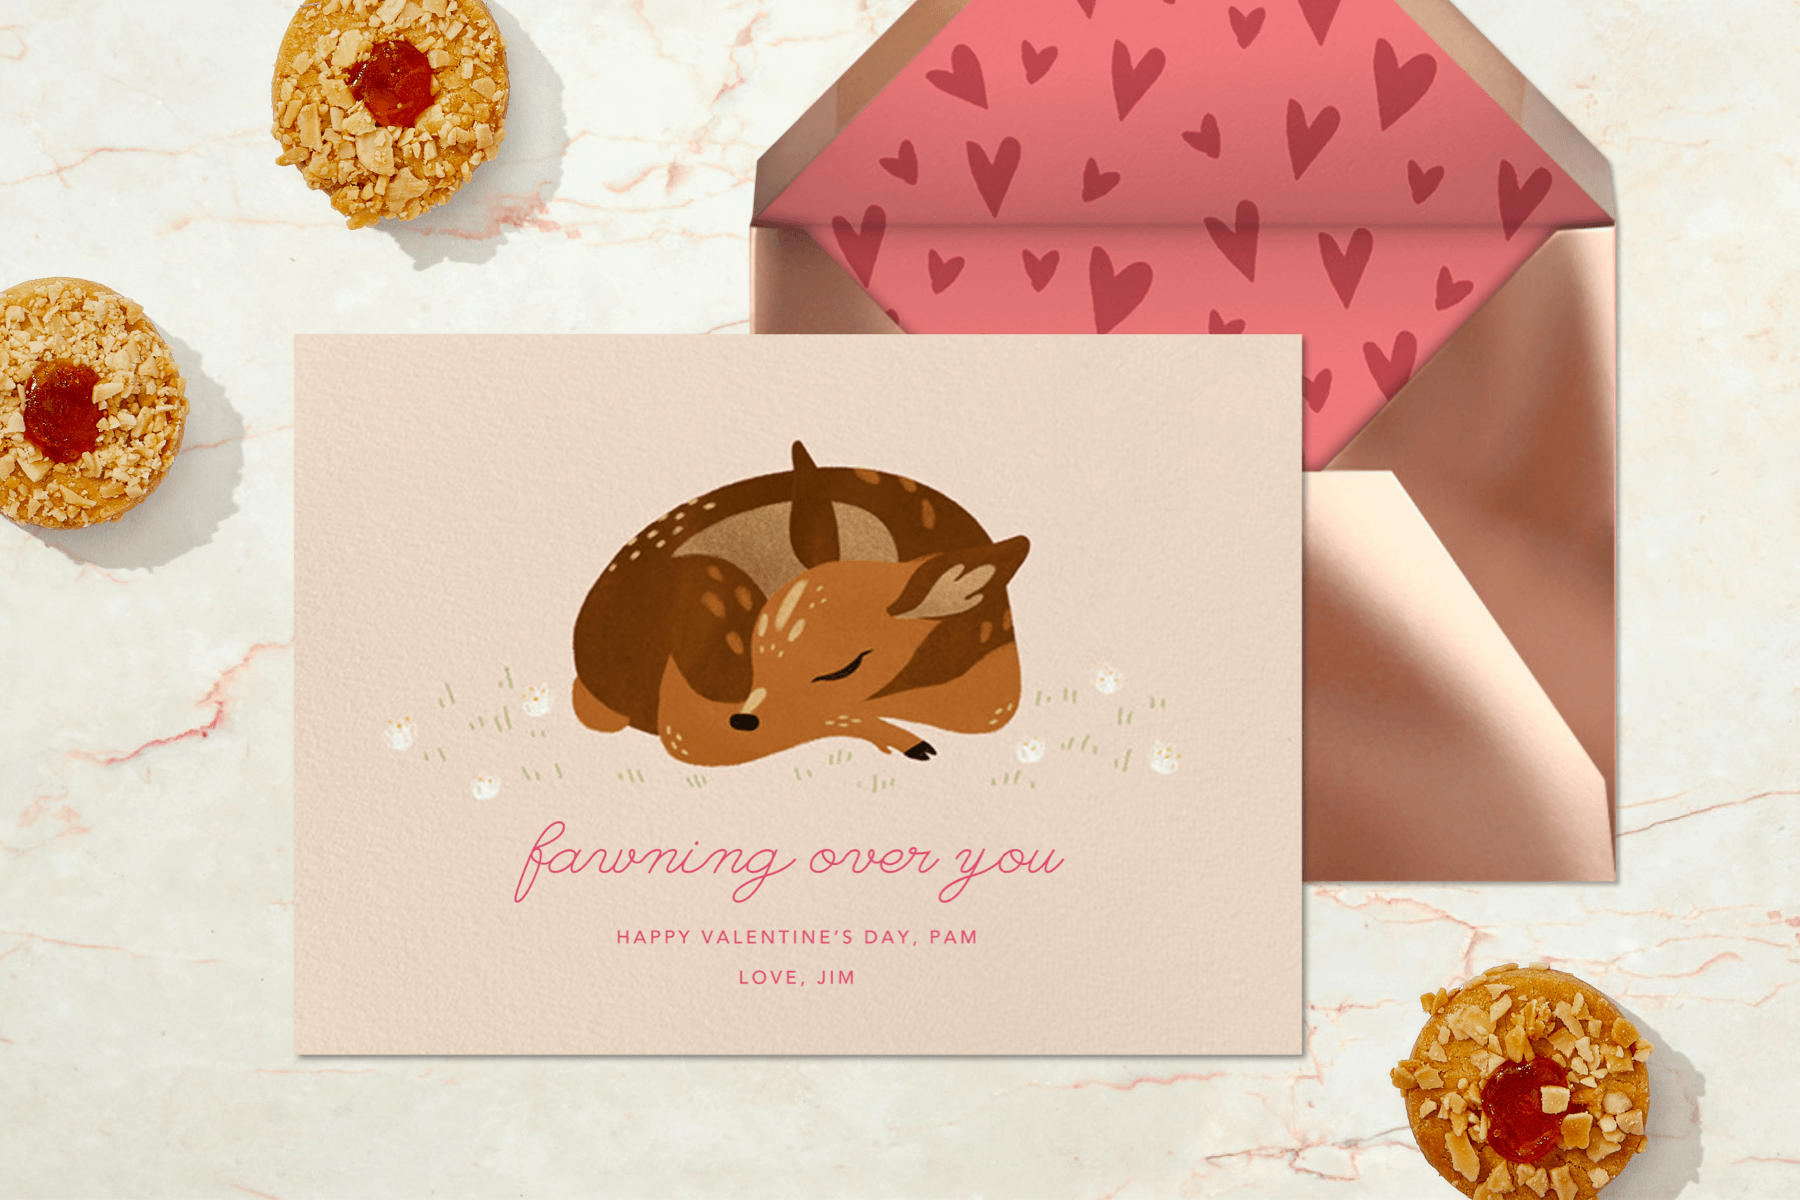 A Valentine’s Day card featuring a sleeping fawn.